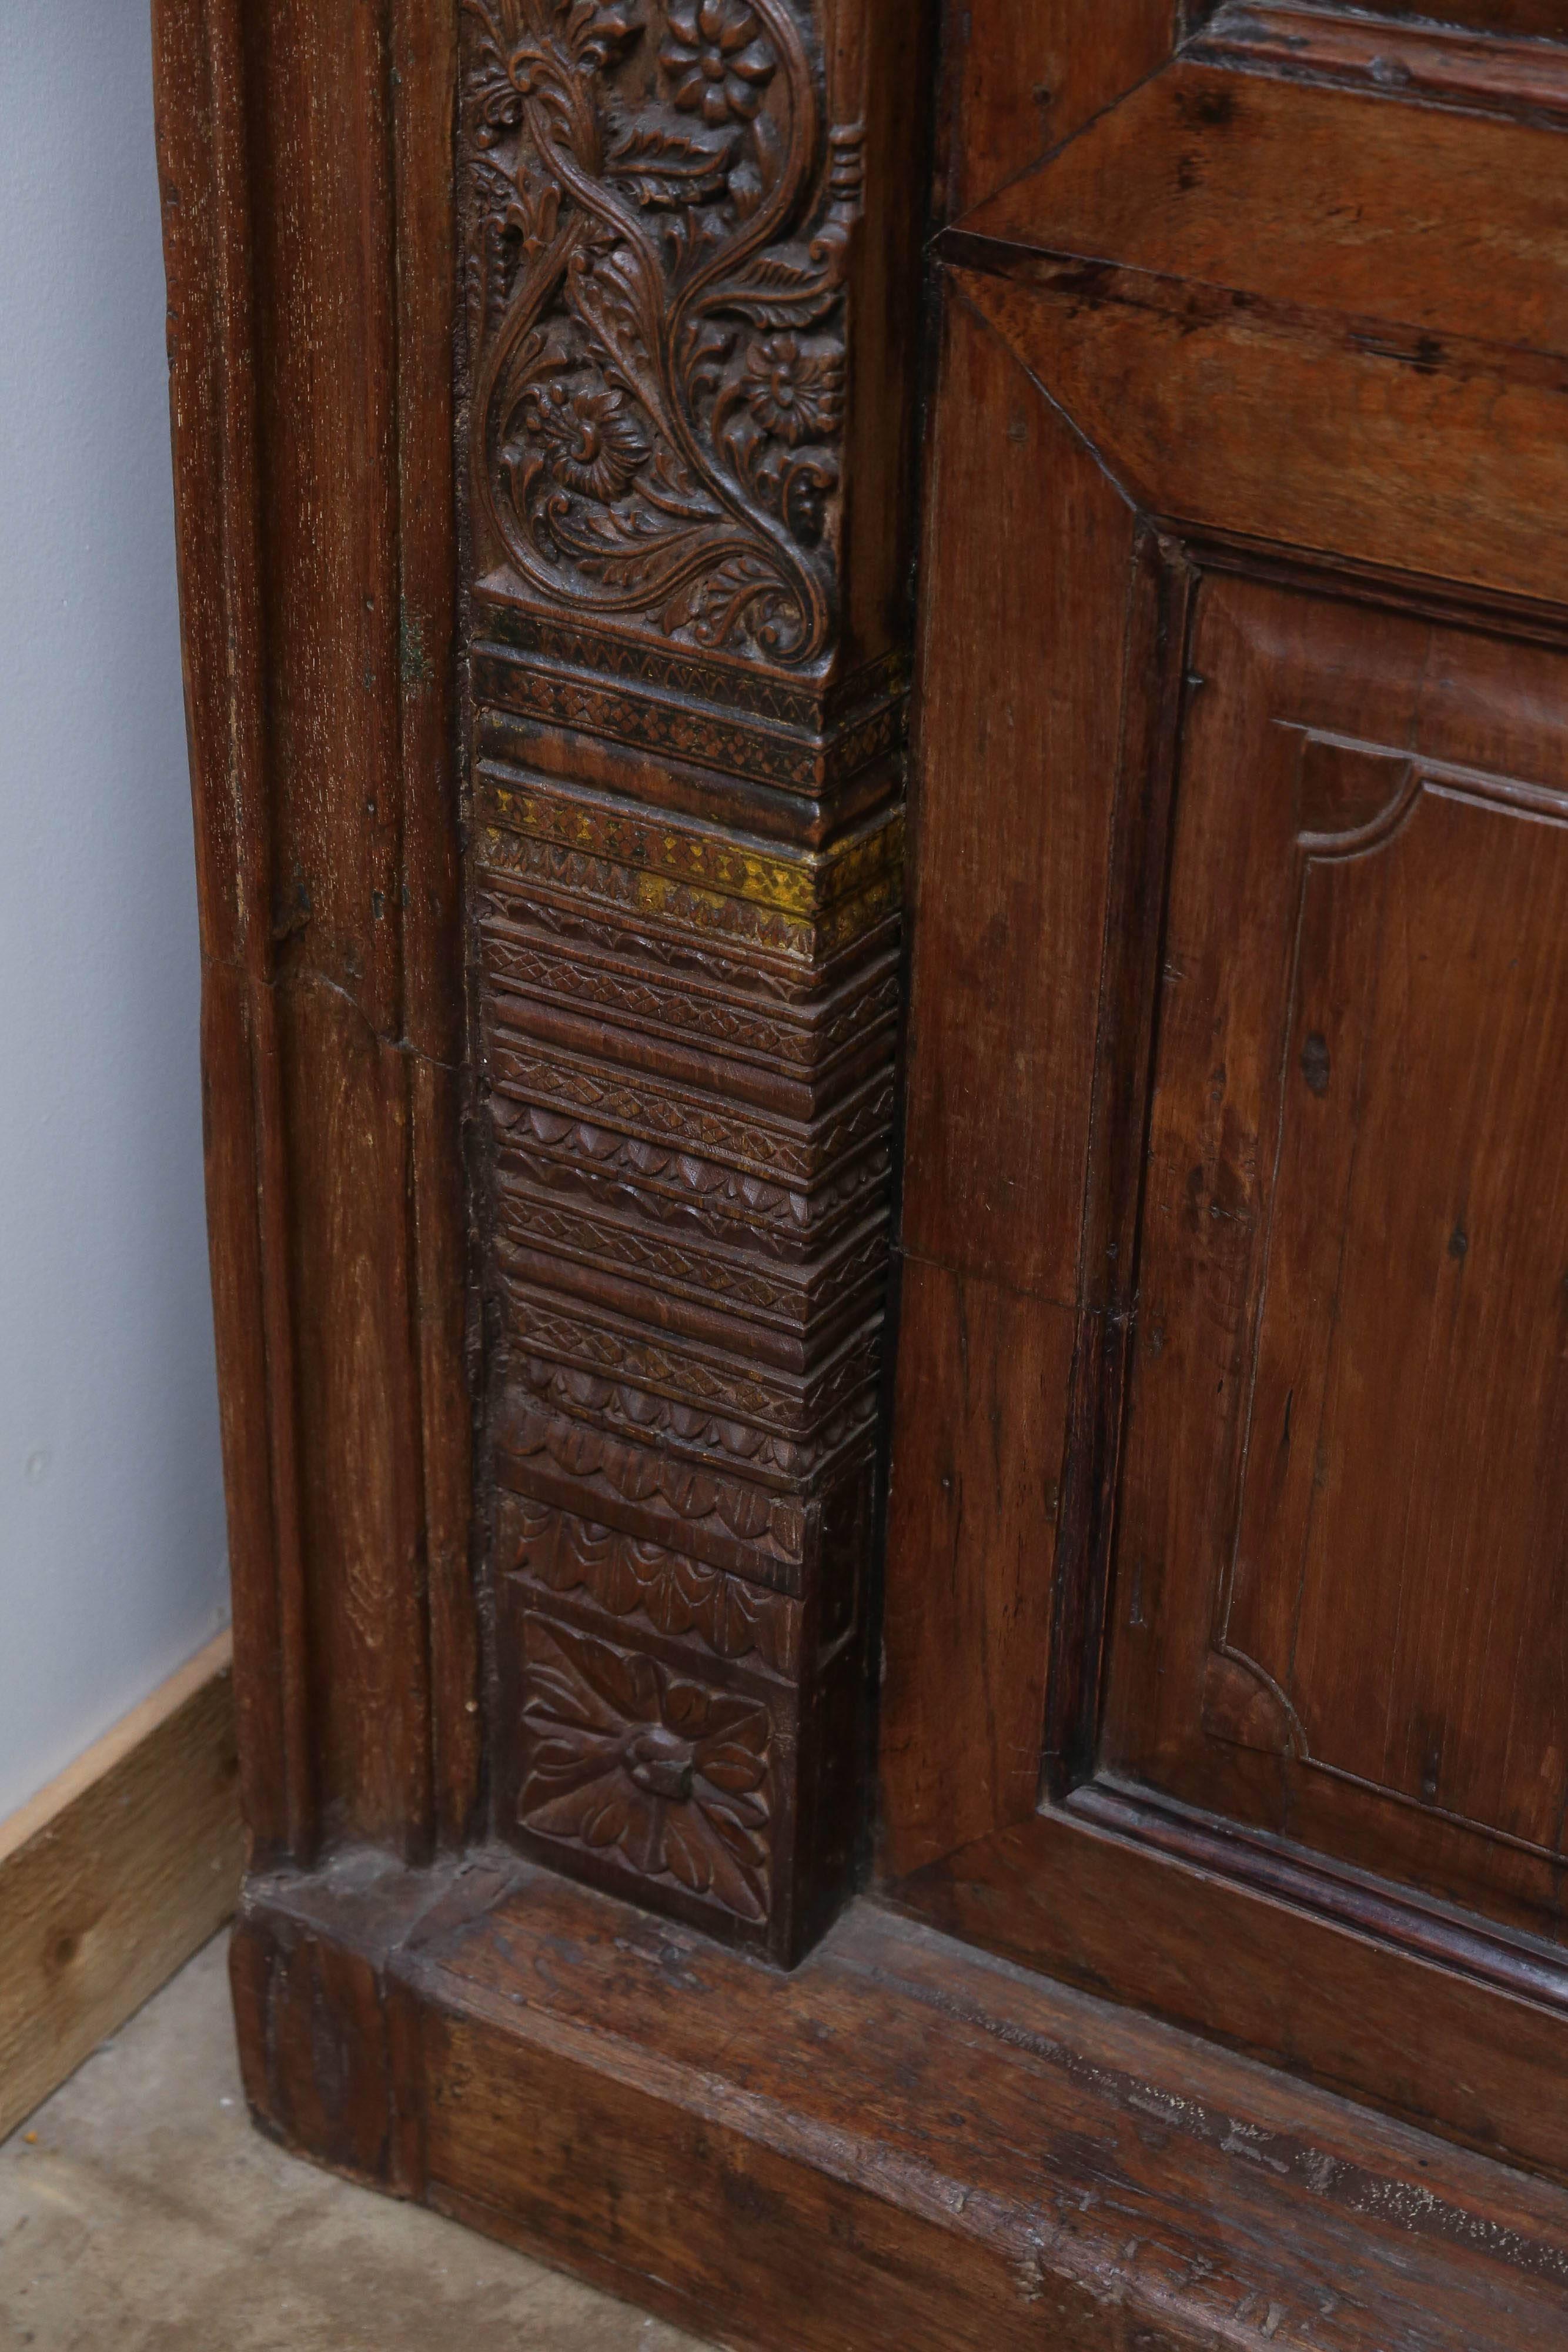 Hand-Crafted Third Quarter of the 19th Century Solid Teak Wood Superbly Crafted Entry Door For Sale